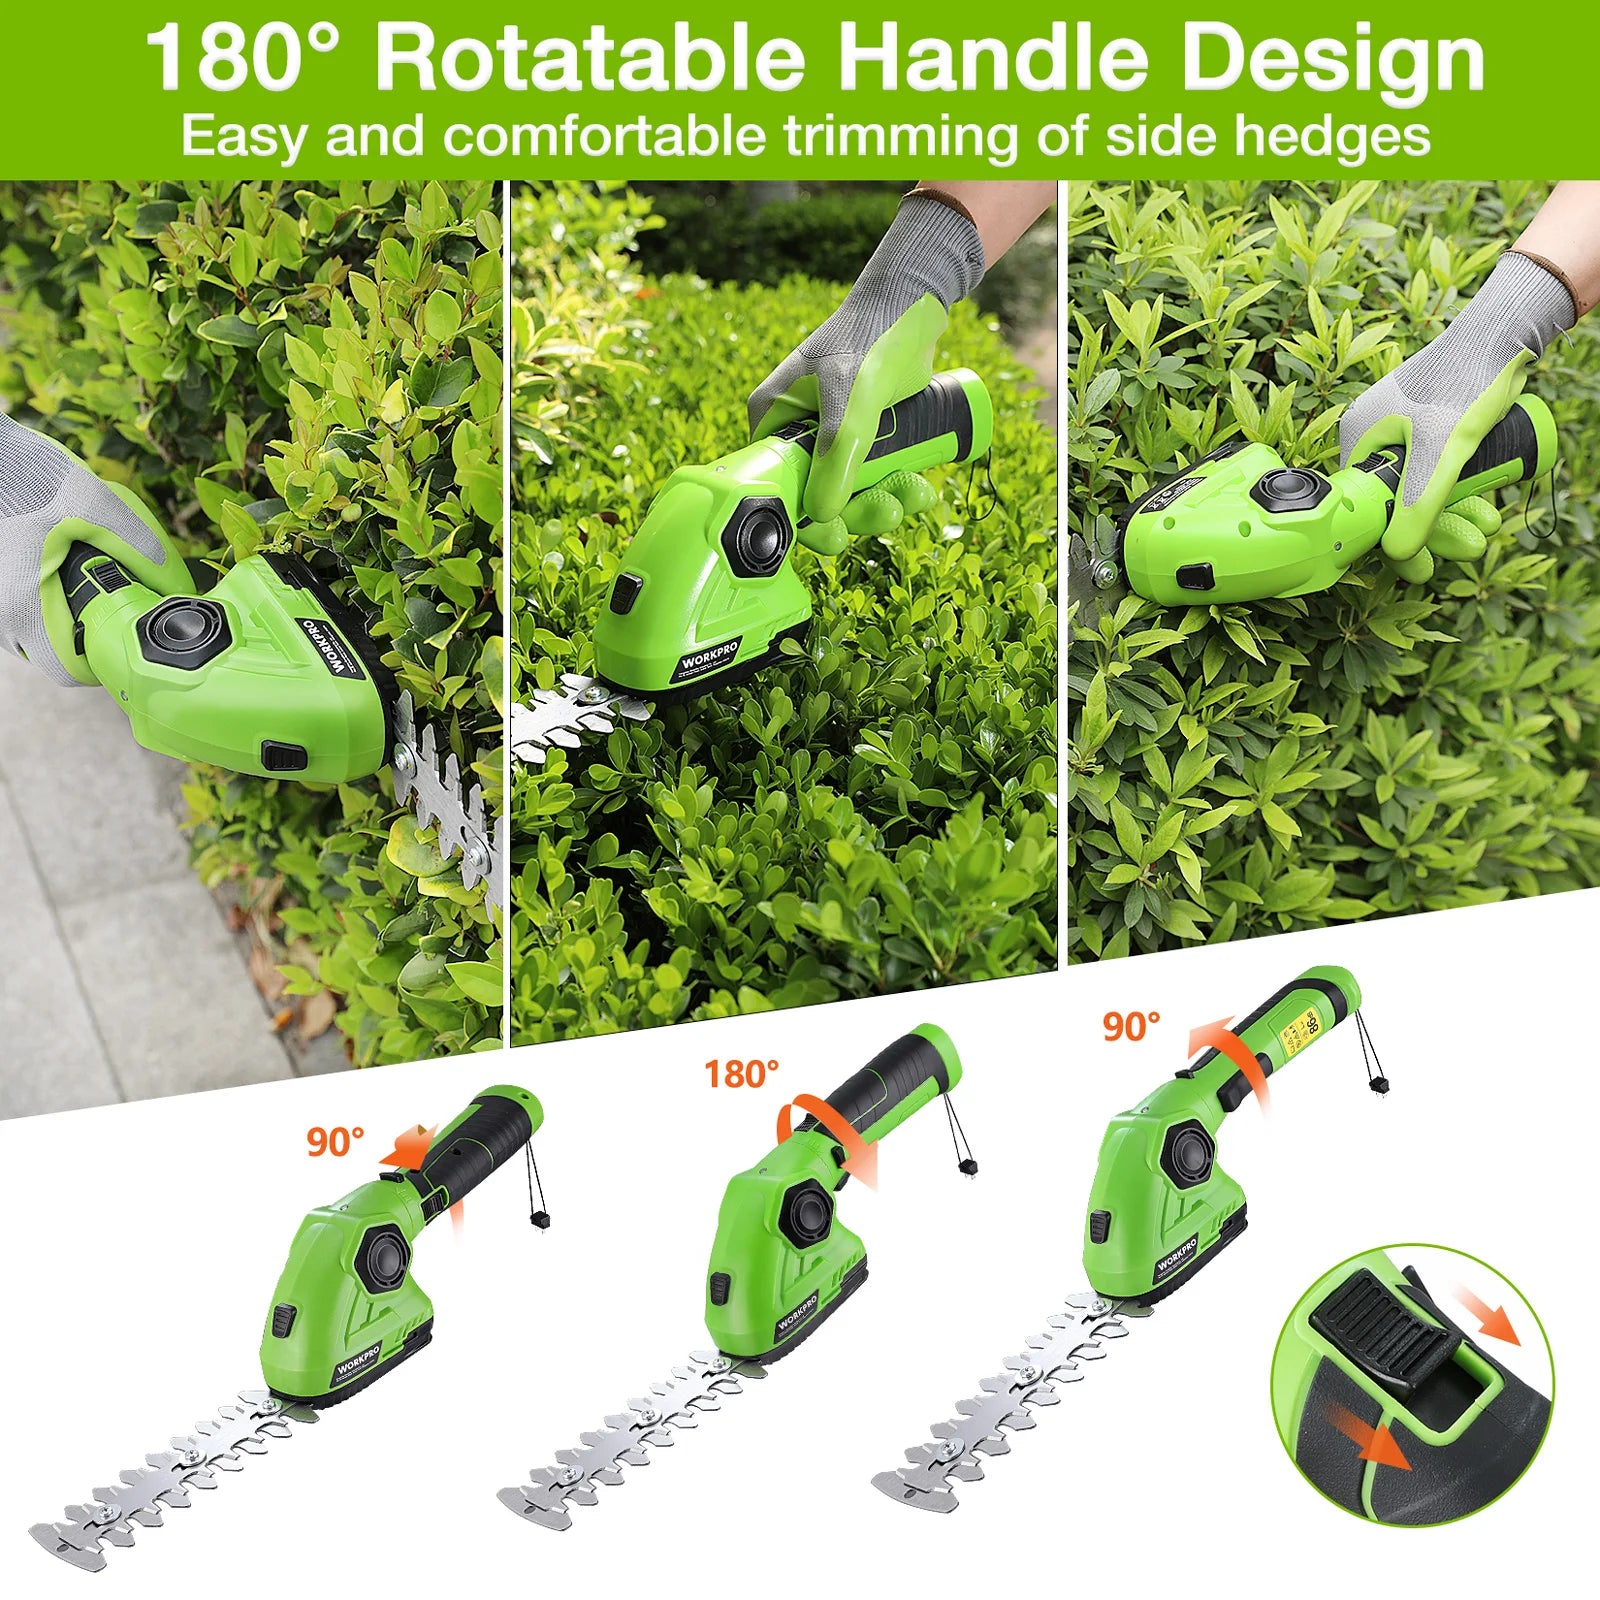 WORKPRO 7.2V Handheld Hedge Trimmer, 2 in 1 Lithium-ion Cordless Garden Tools Cordless Grass Shear / Shrubber Electric Trimmer